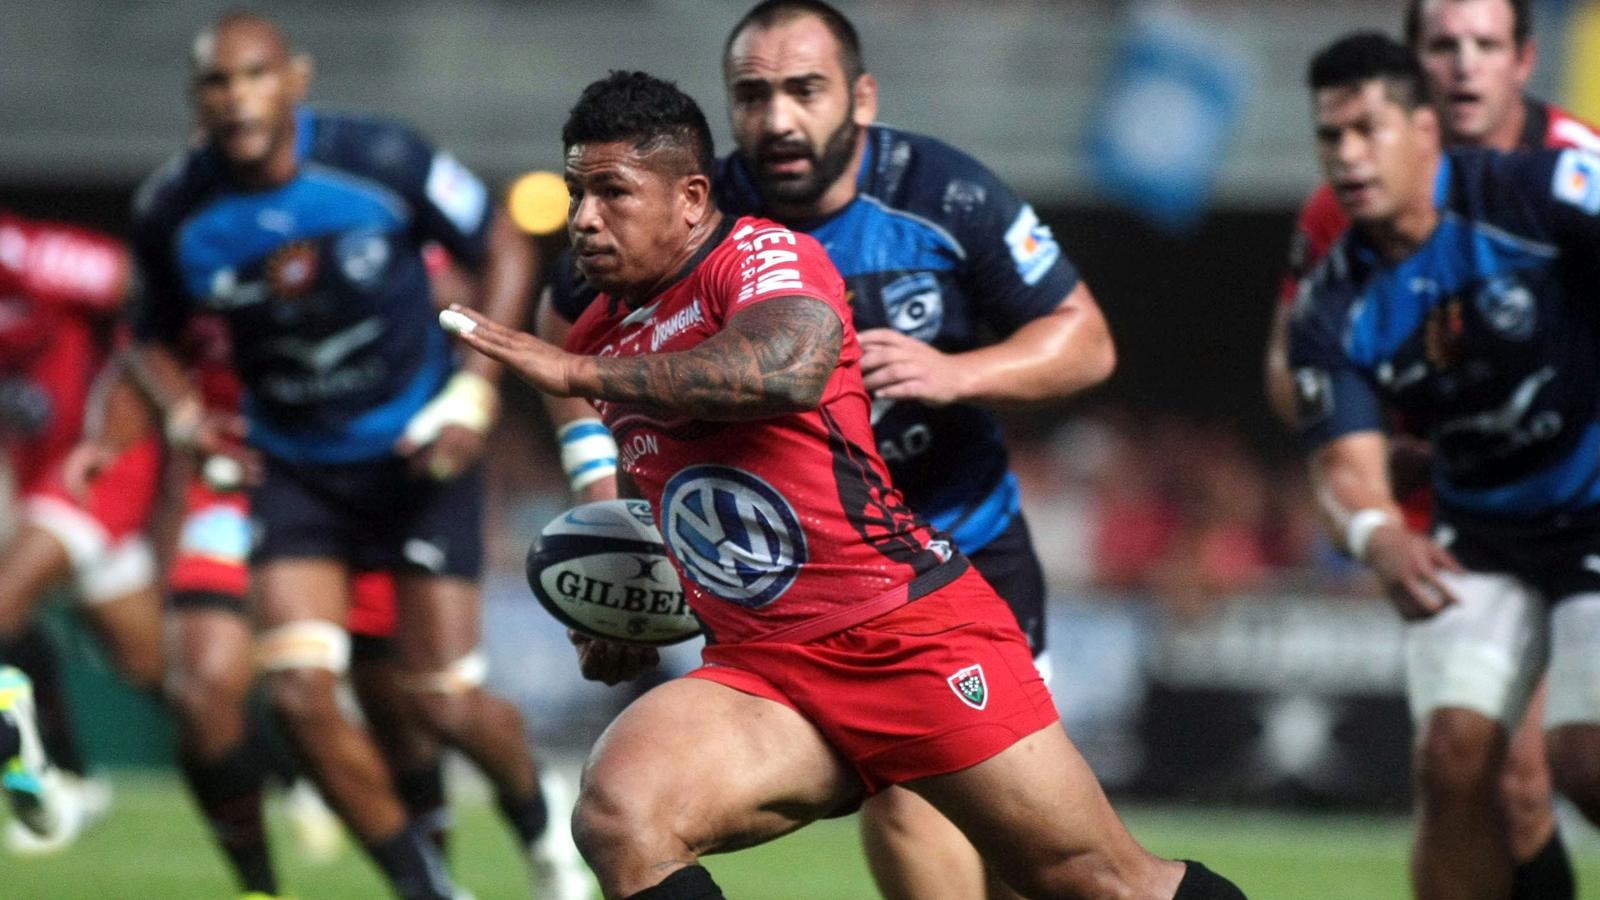 Champions Cup Rugby Ulester vs RC Toulon en direct live streaming